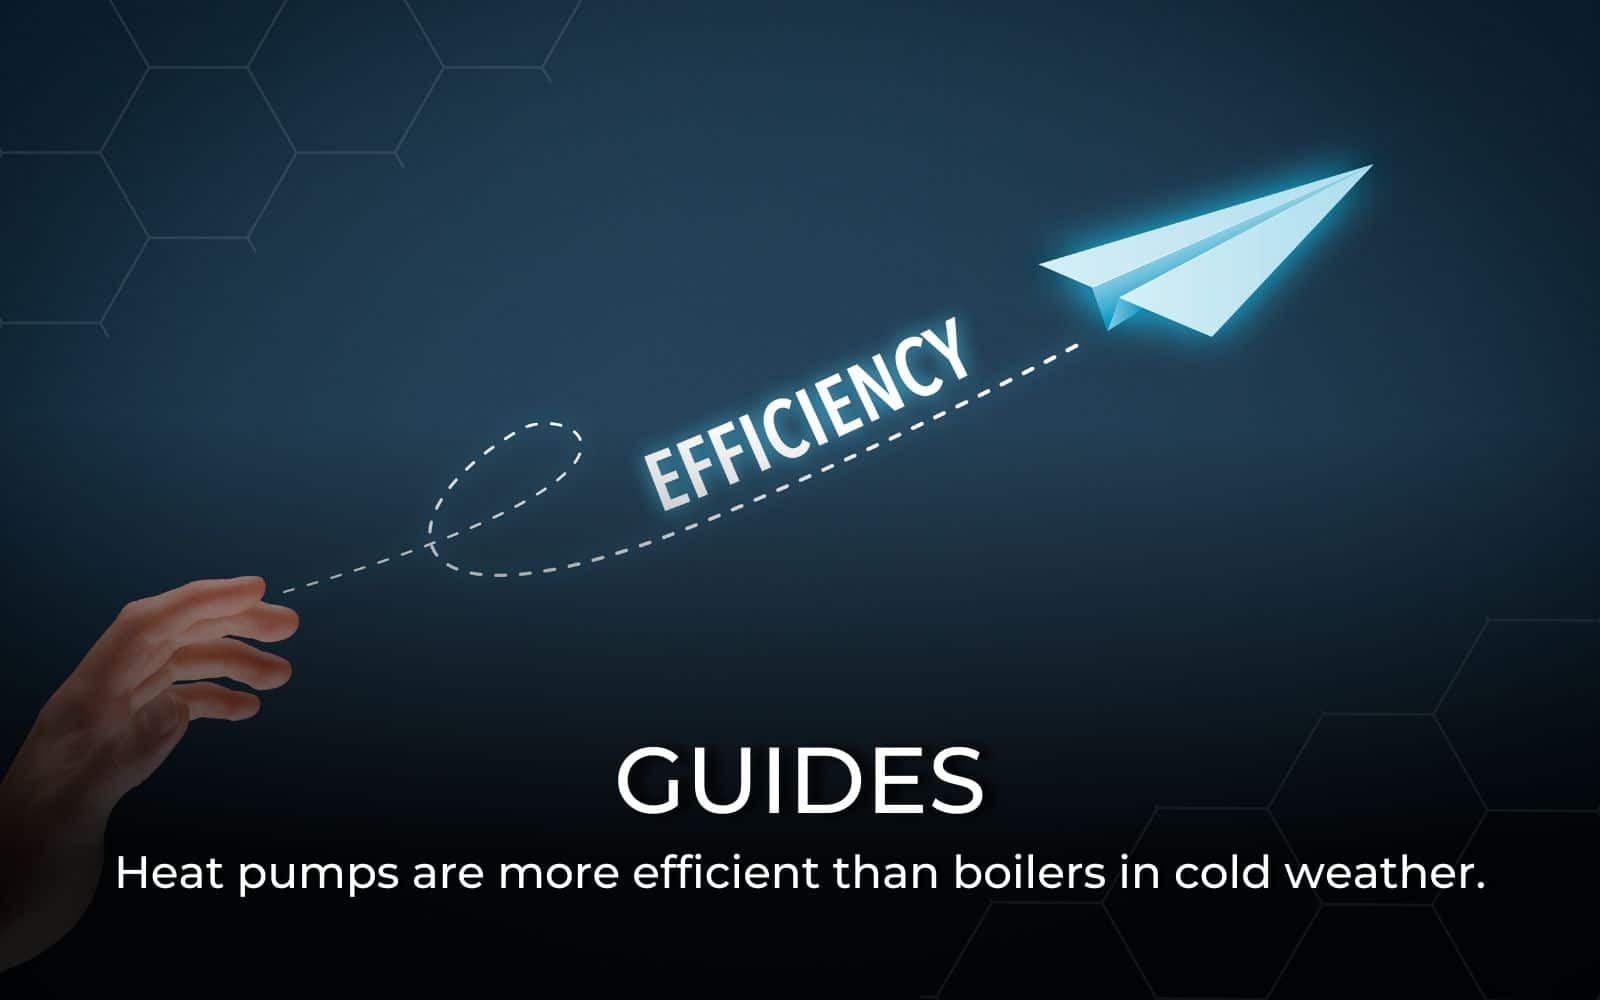 Heat pumps are more efficient than boilers in cold weather